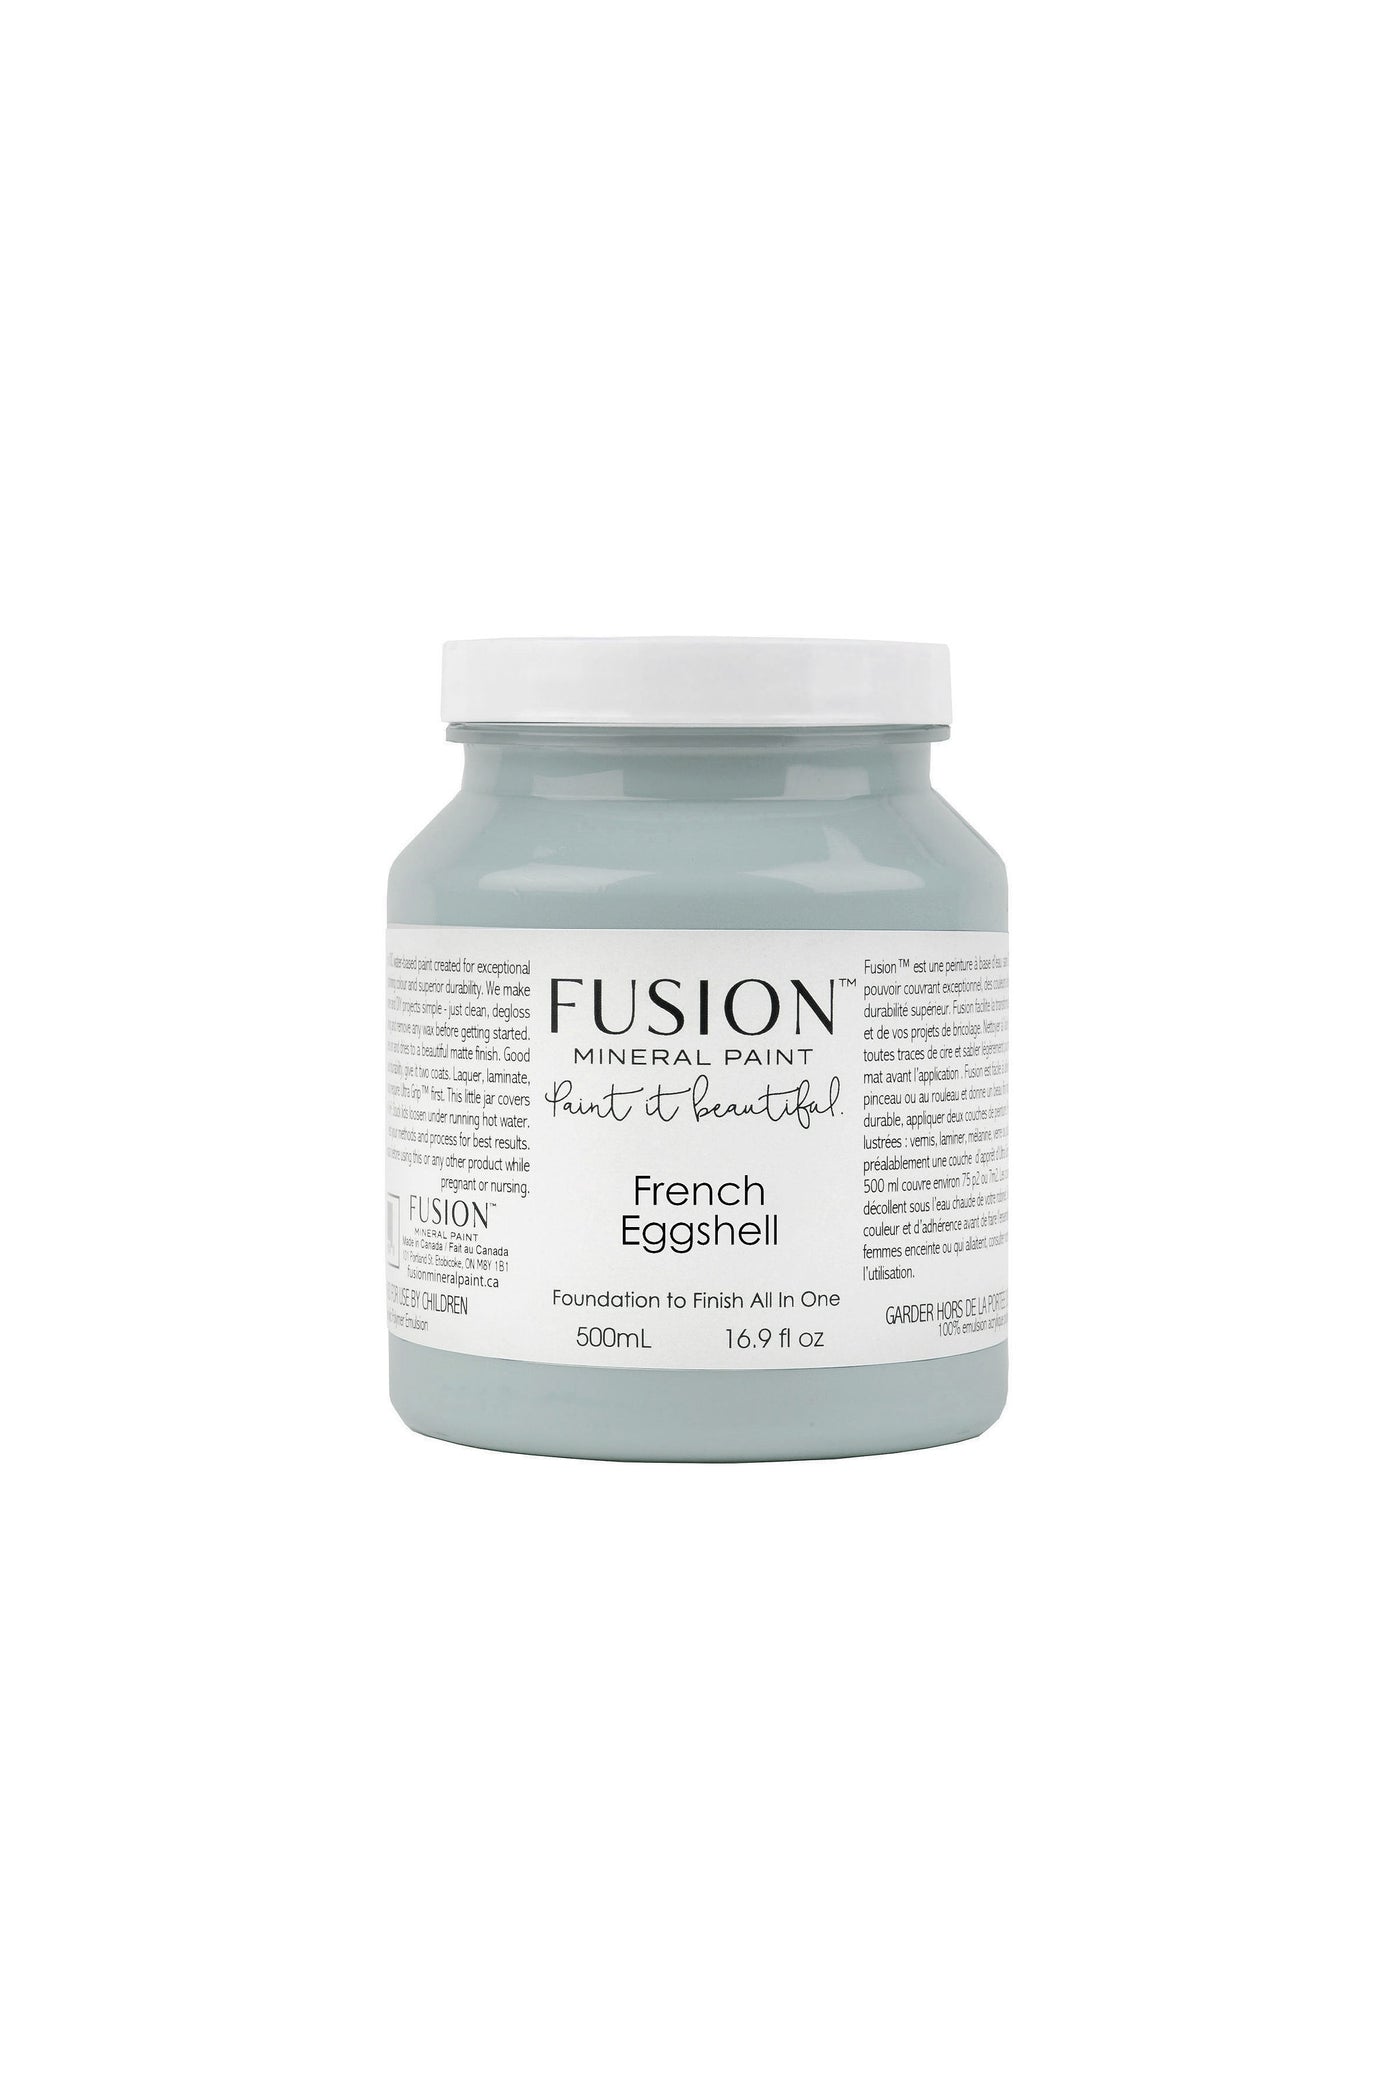 FRENCH EGGSHELL- FUSION MINERAL PAINT